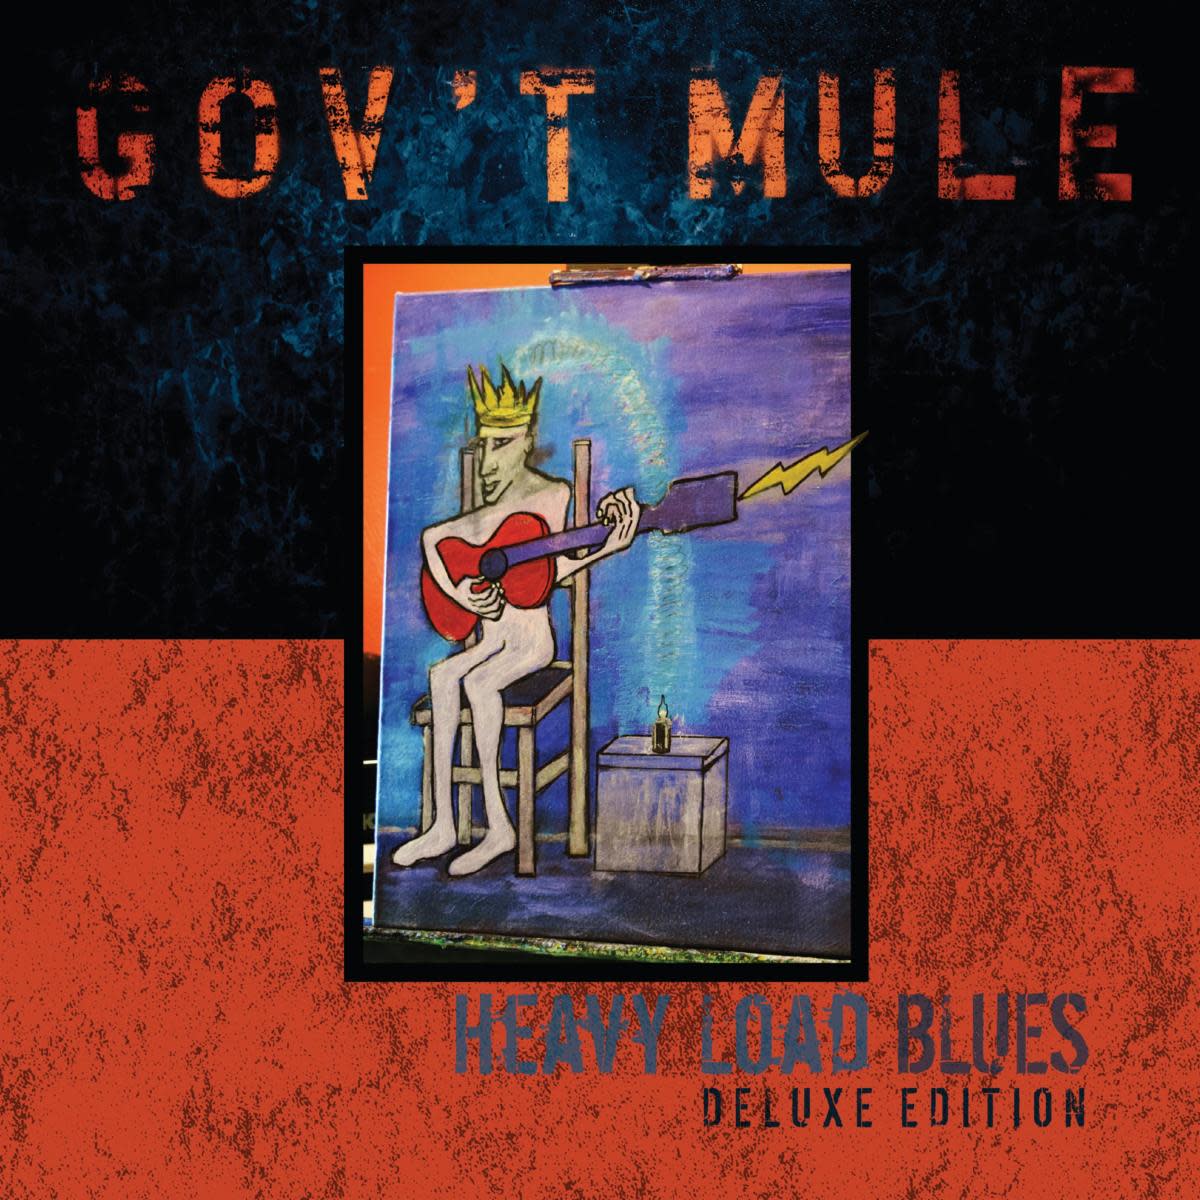 Heavy Load Blues Deluxe cover